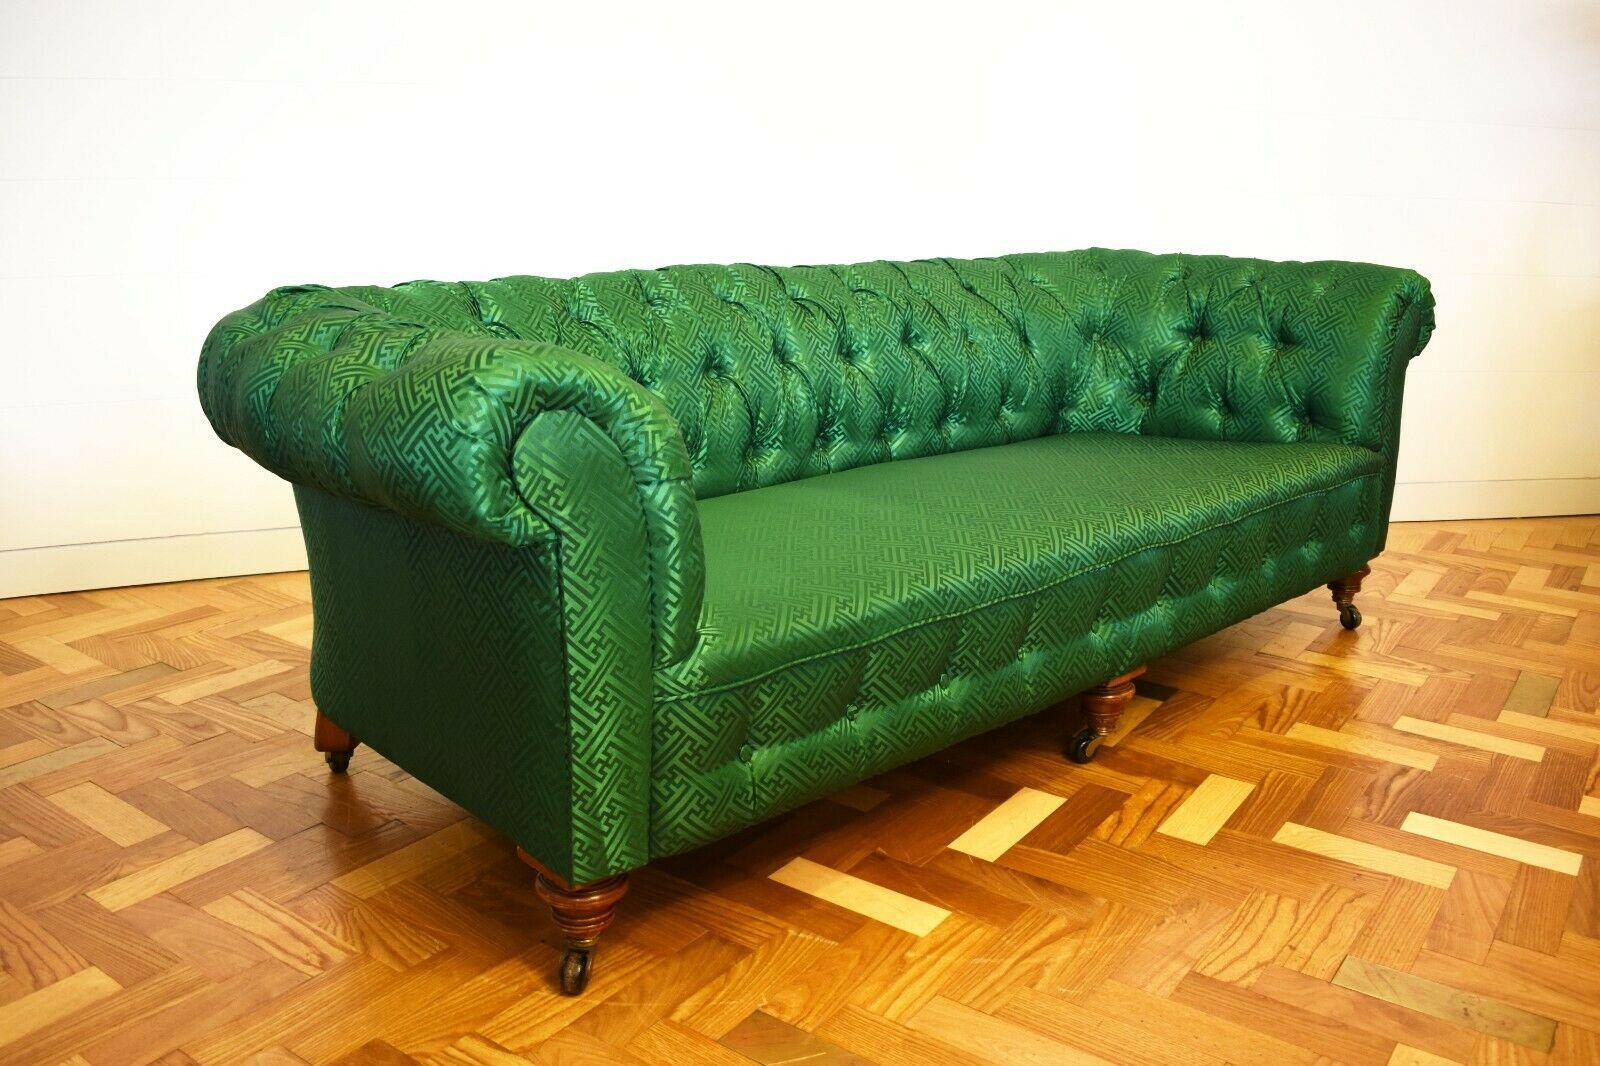 Victorian button back Chesterfield with mahogony legs, upholstered in green silk

Set upon mahogony legs with brass castors, this classic Victoria chesterfield sofa design has been reimagined through its newly upholstered green geometric silk